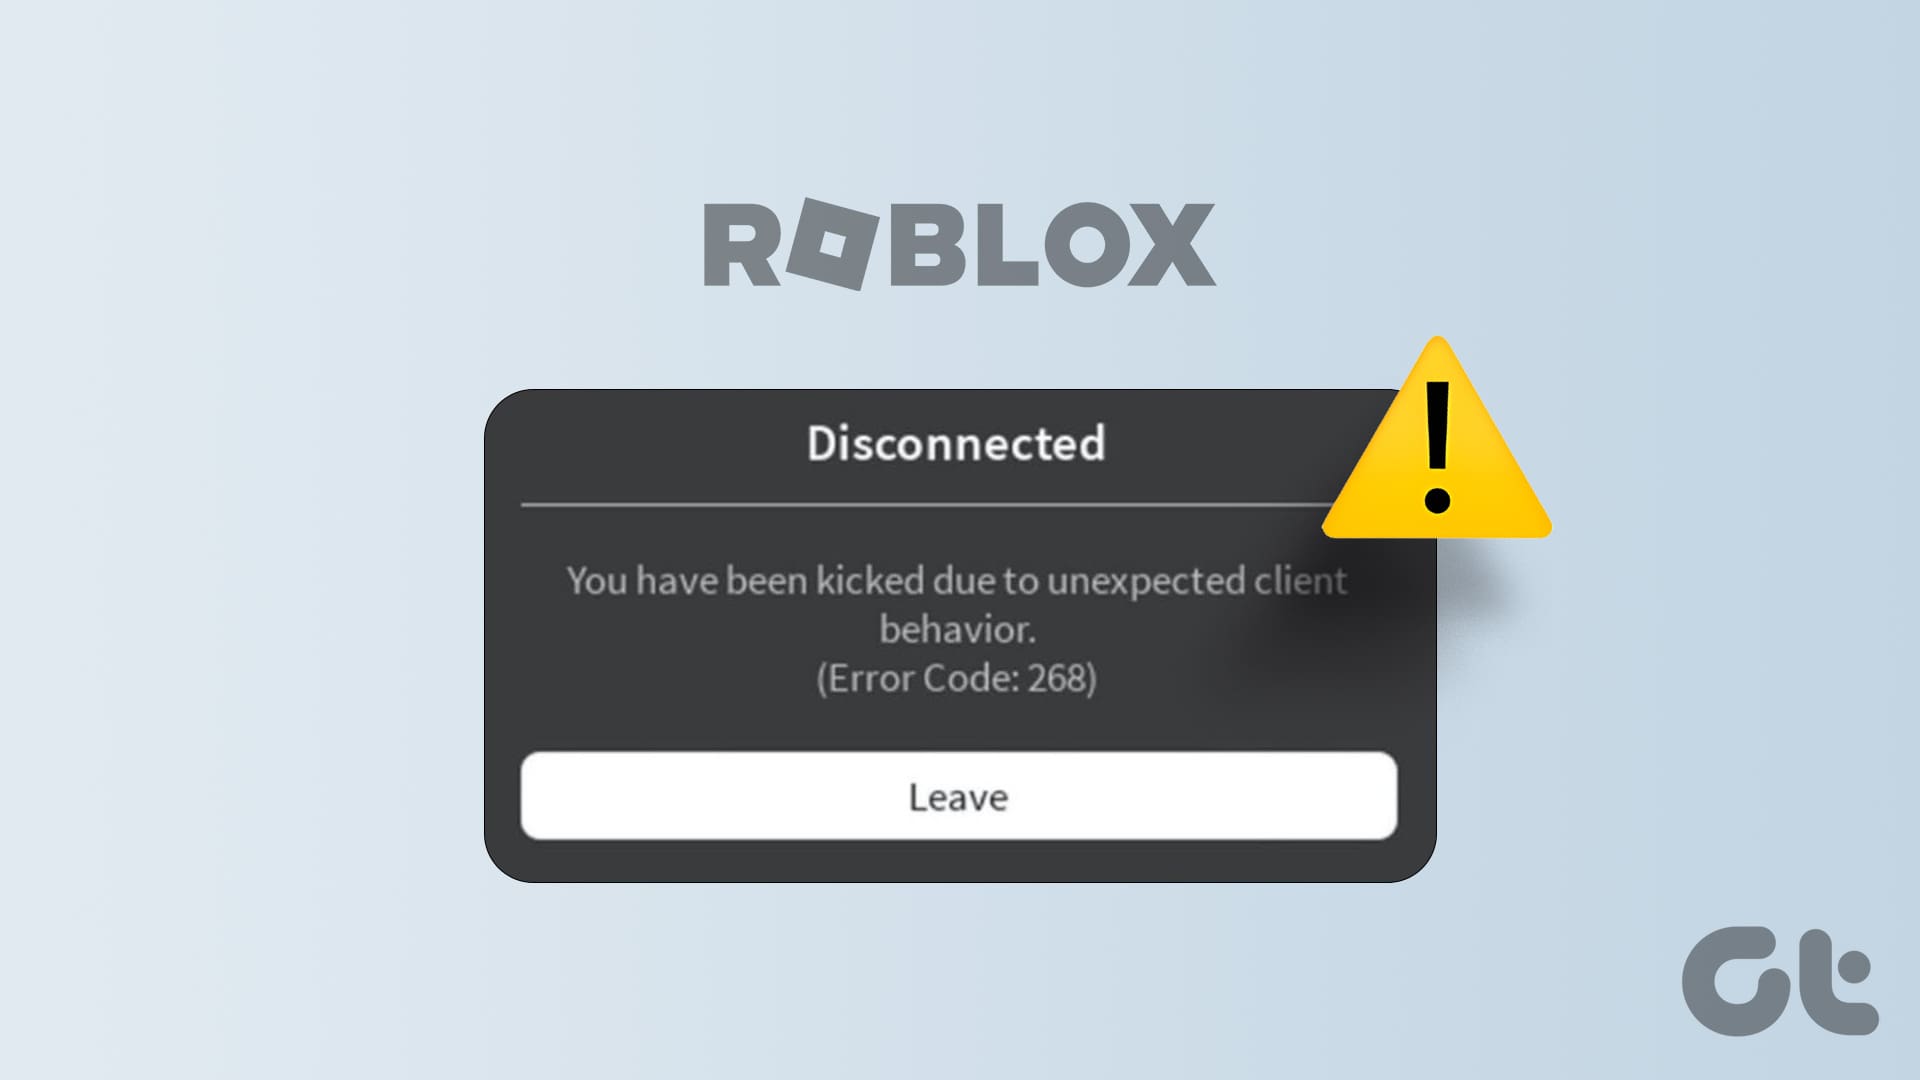 URGENT] All Roblox services NOT loading [ROBLOX IS UP] - Platform